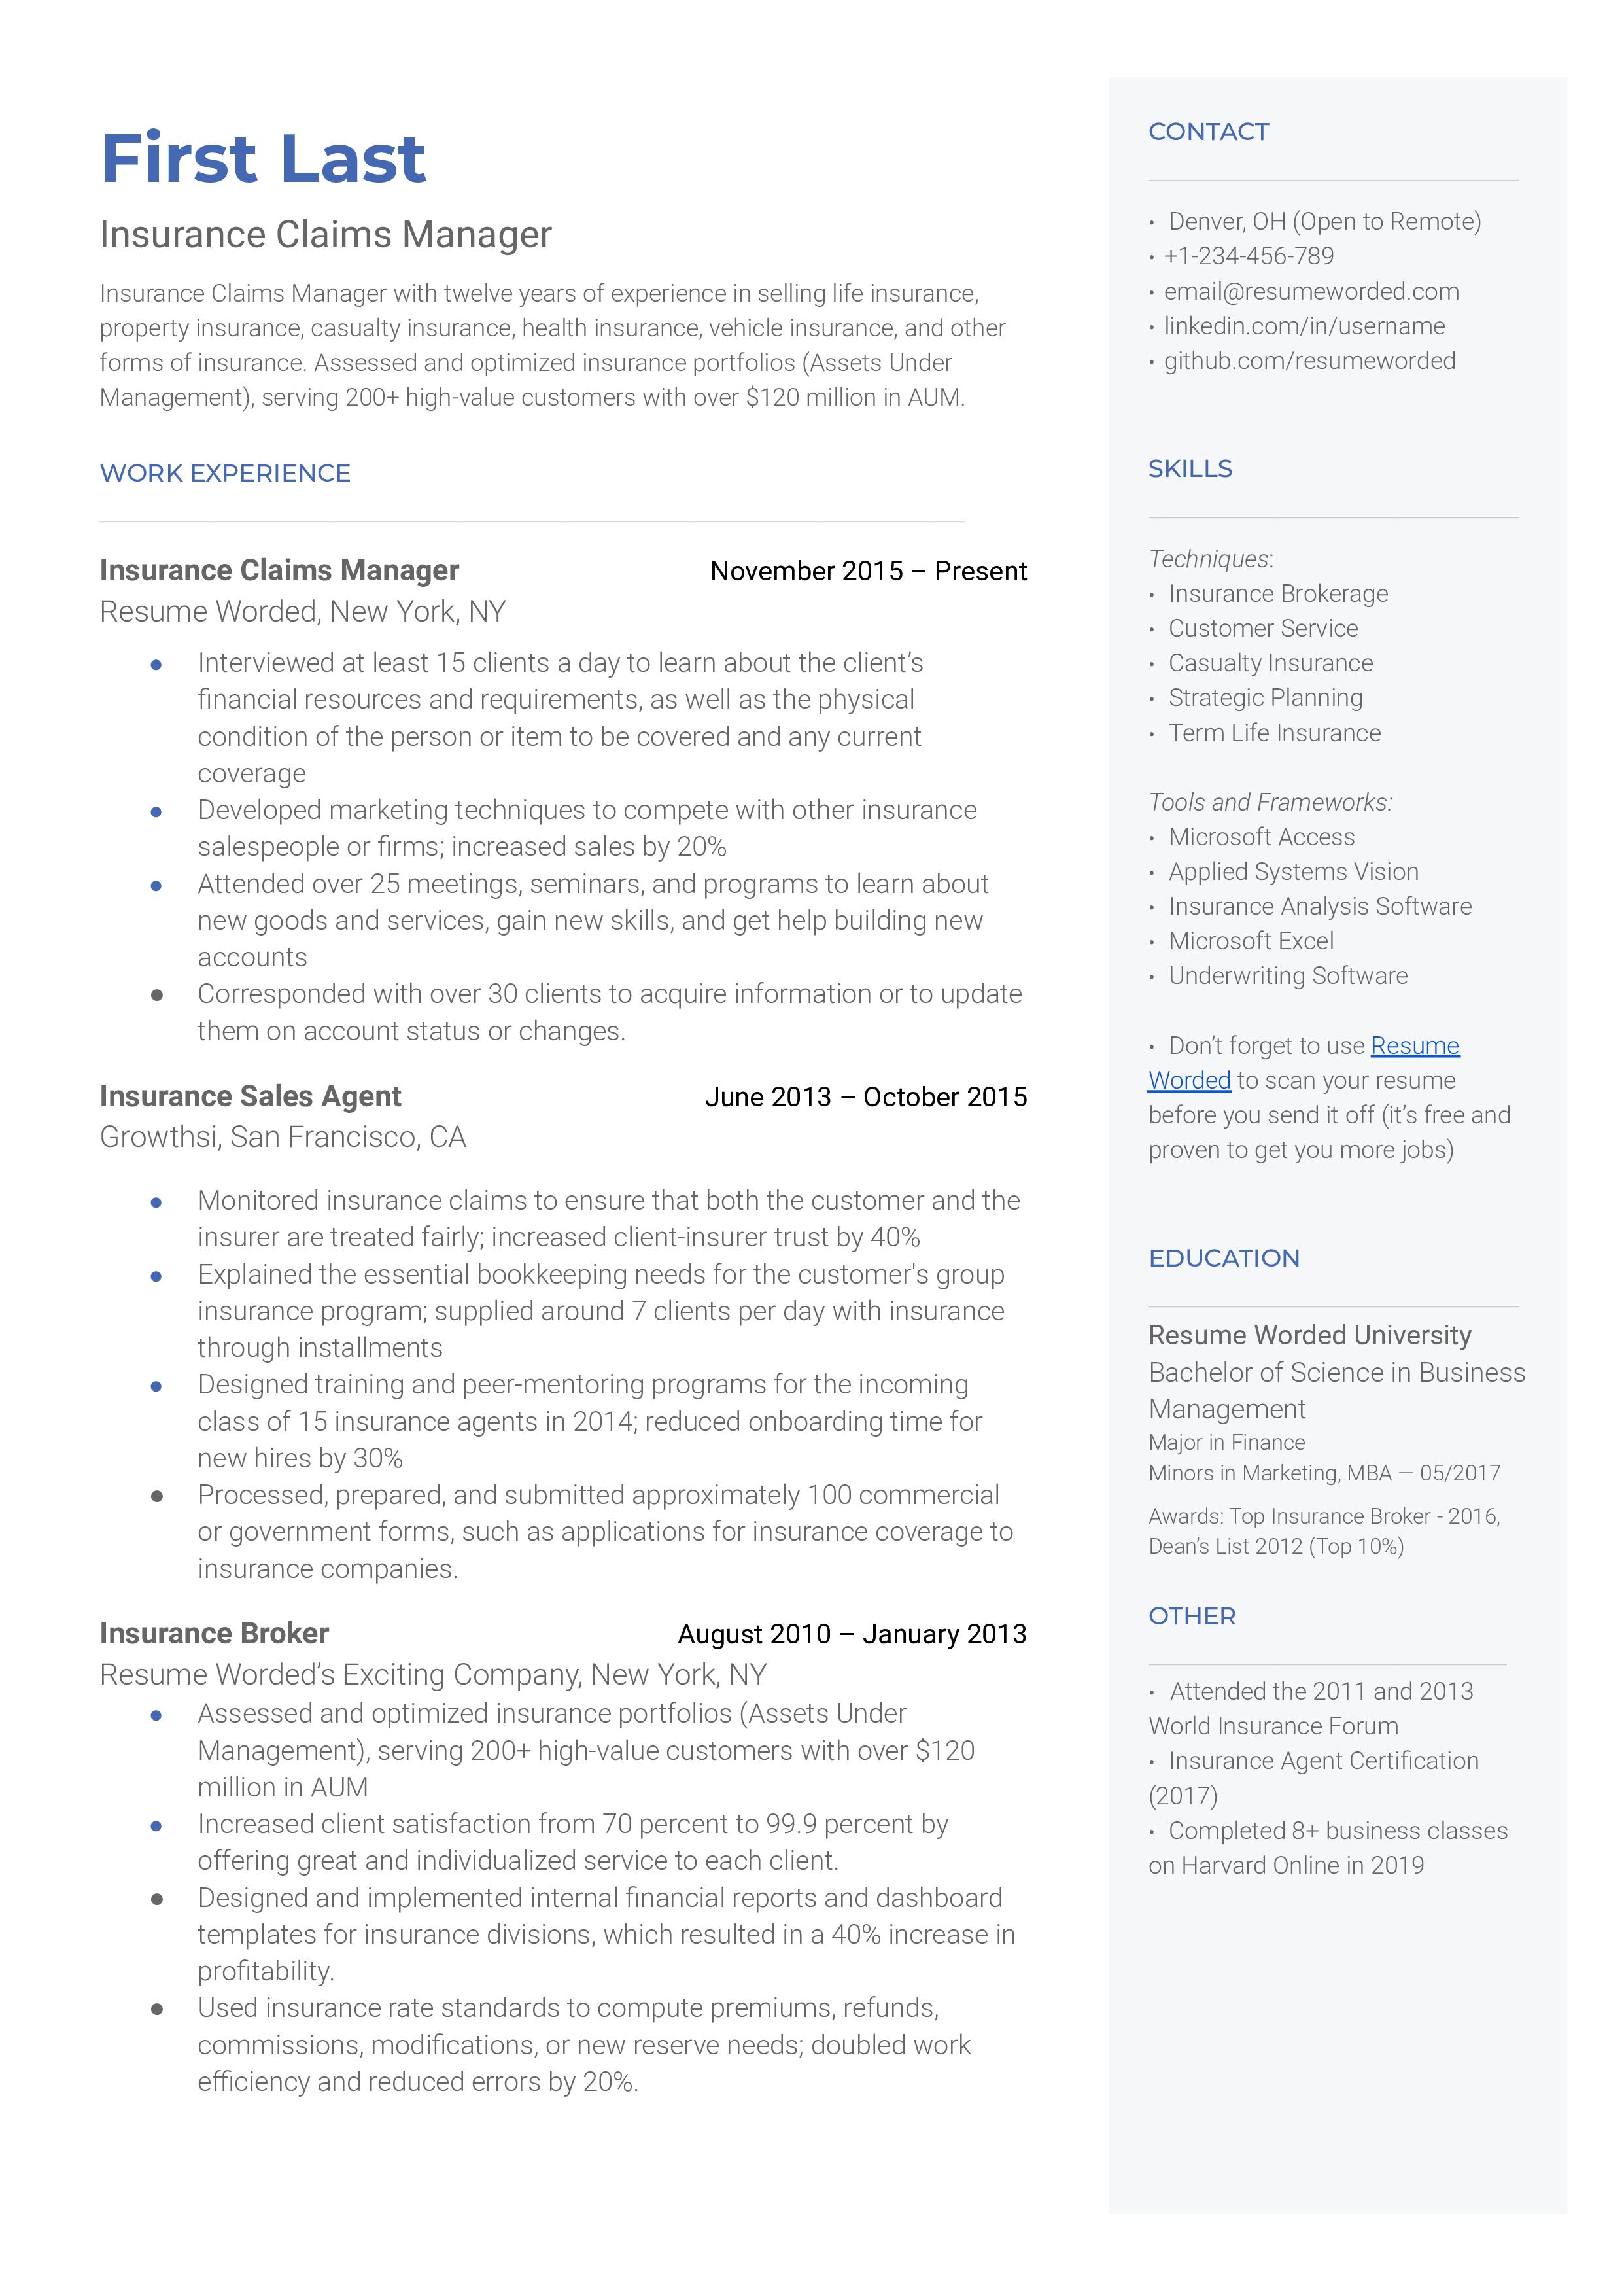 A professionally written CV for an Insurance Claims Manager role.